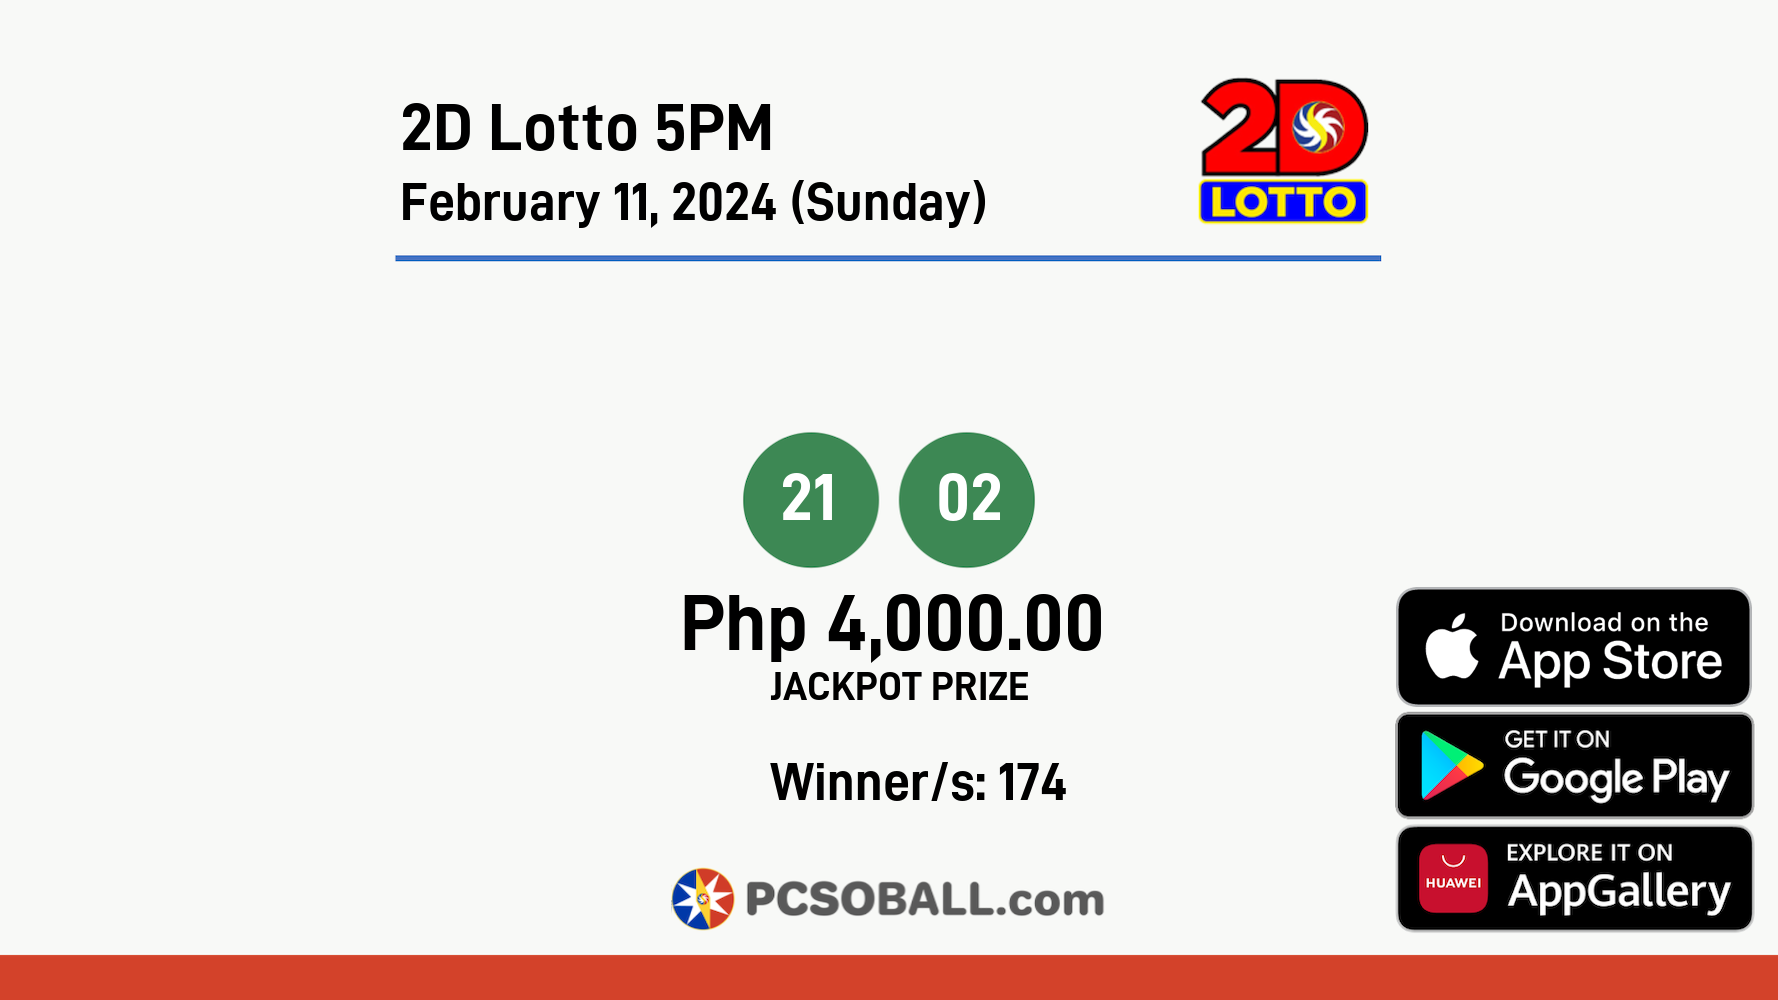 2D Lotto 5PM February 11, 2024 (Sunday) Result